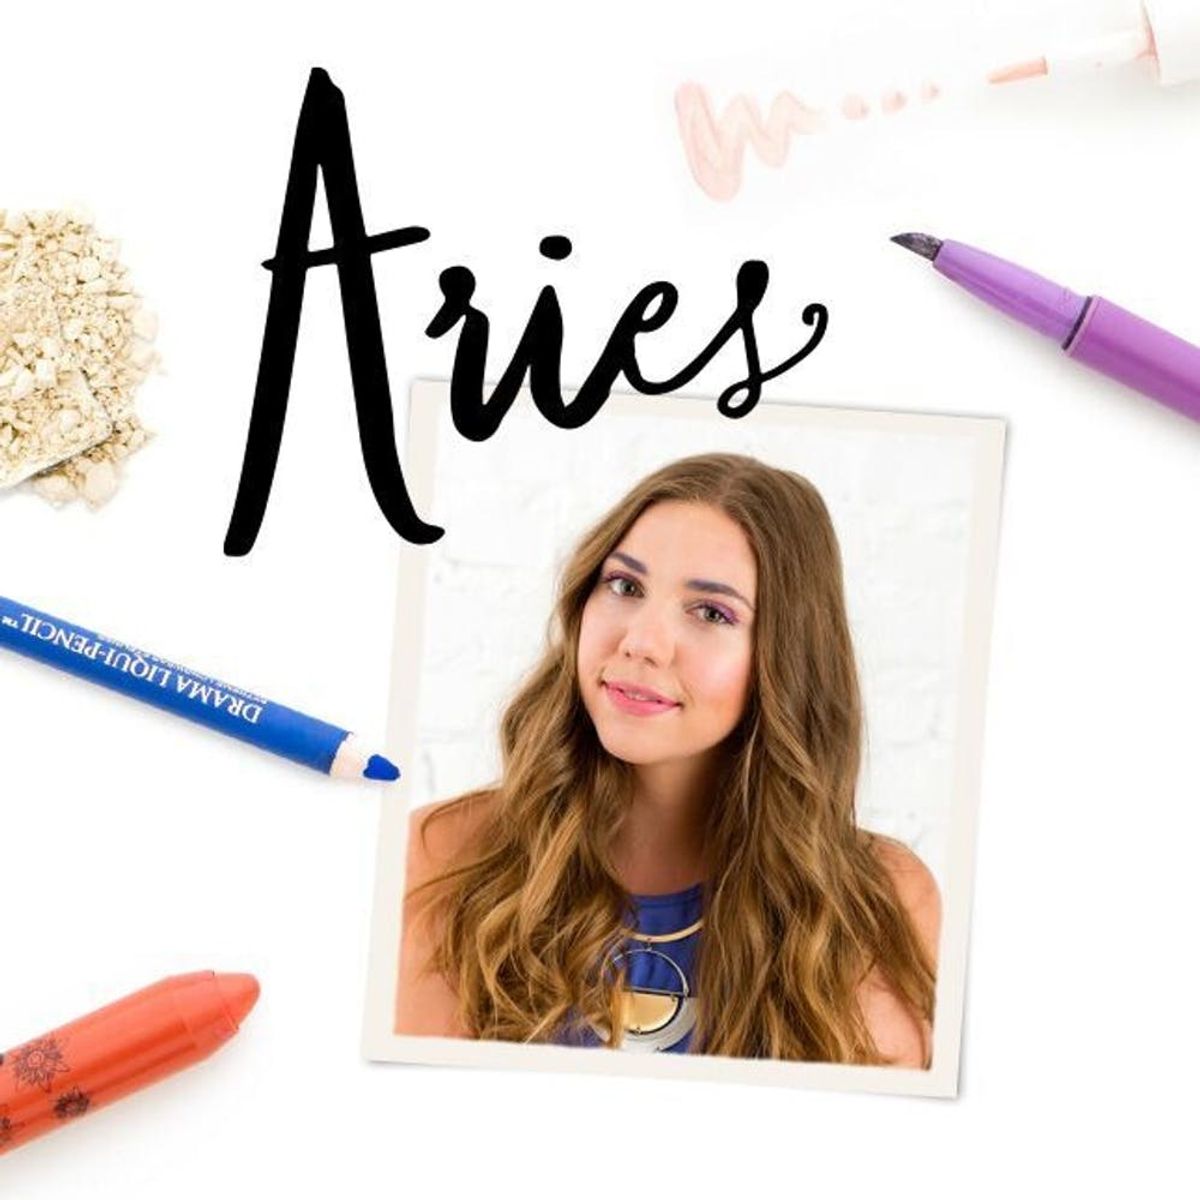 The Best Makeup for Your Zodiac Sign: Aries Edition